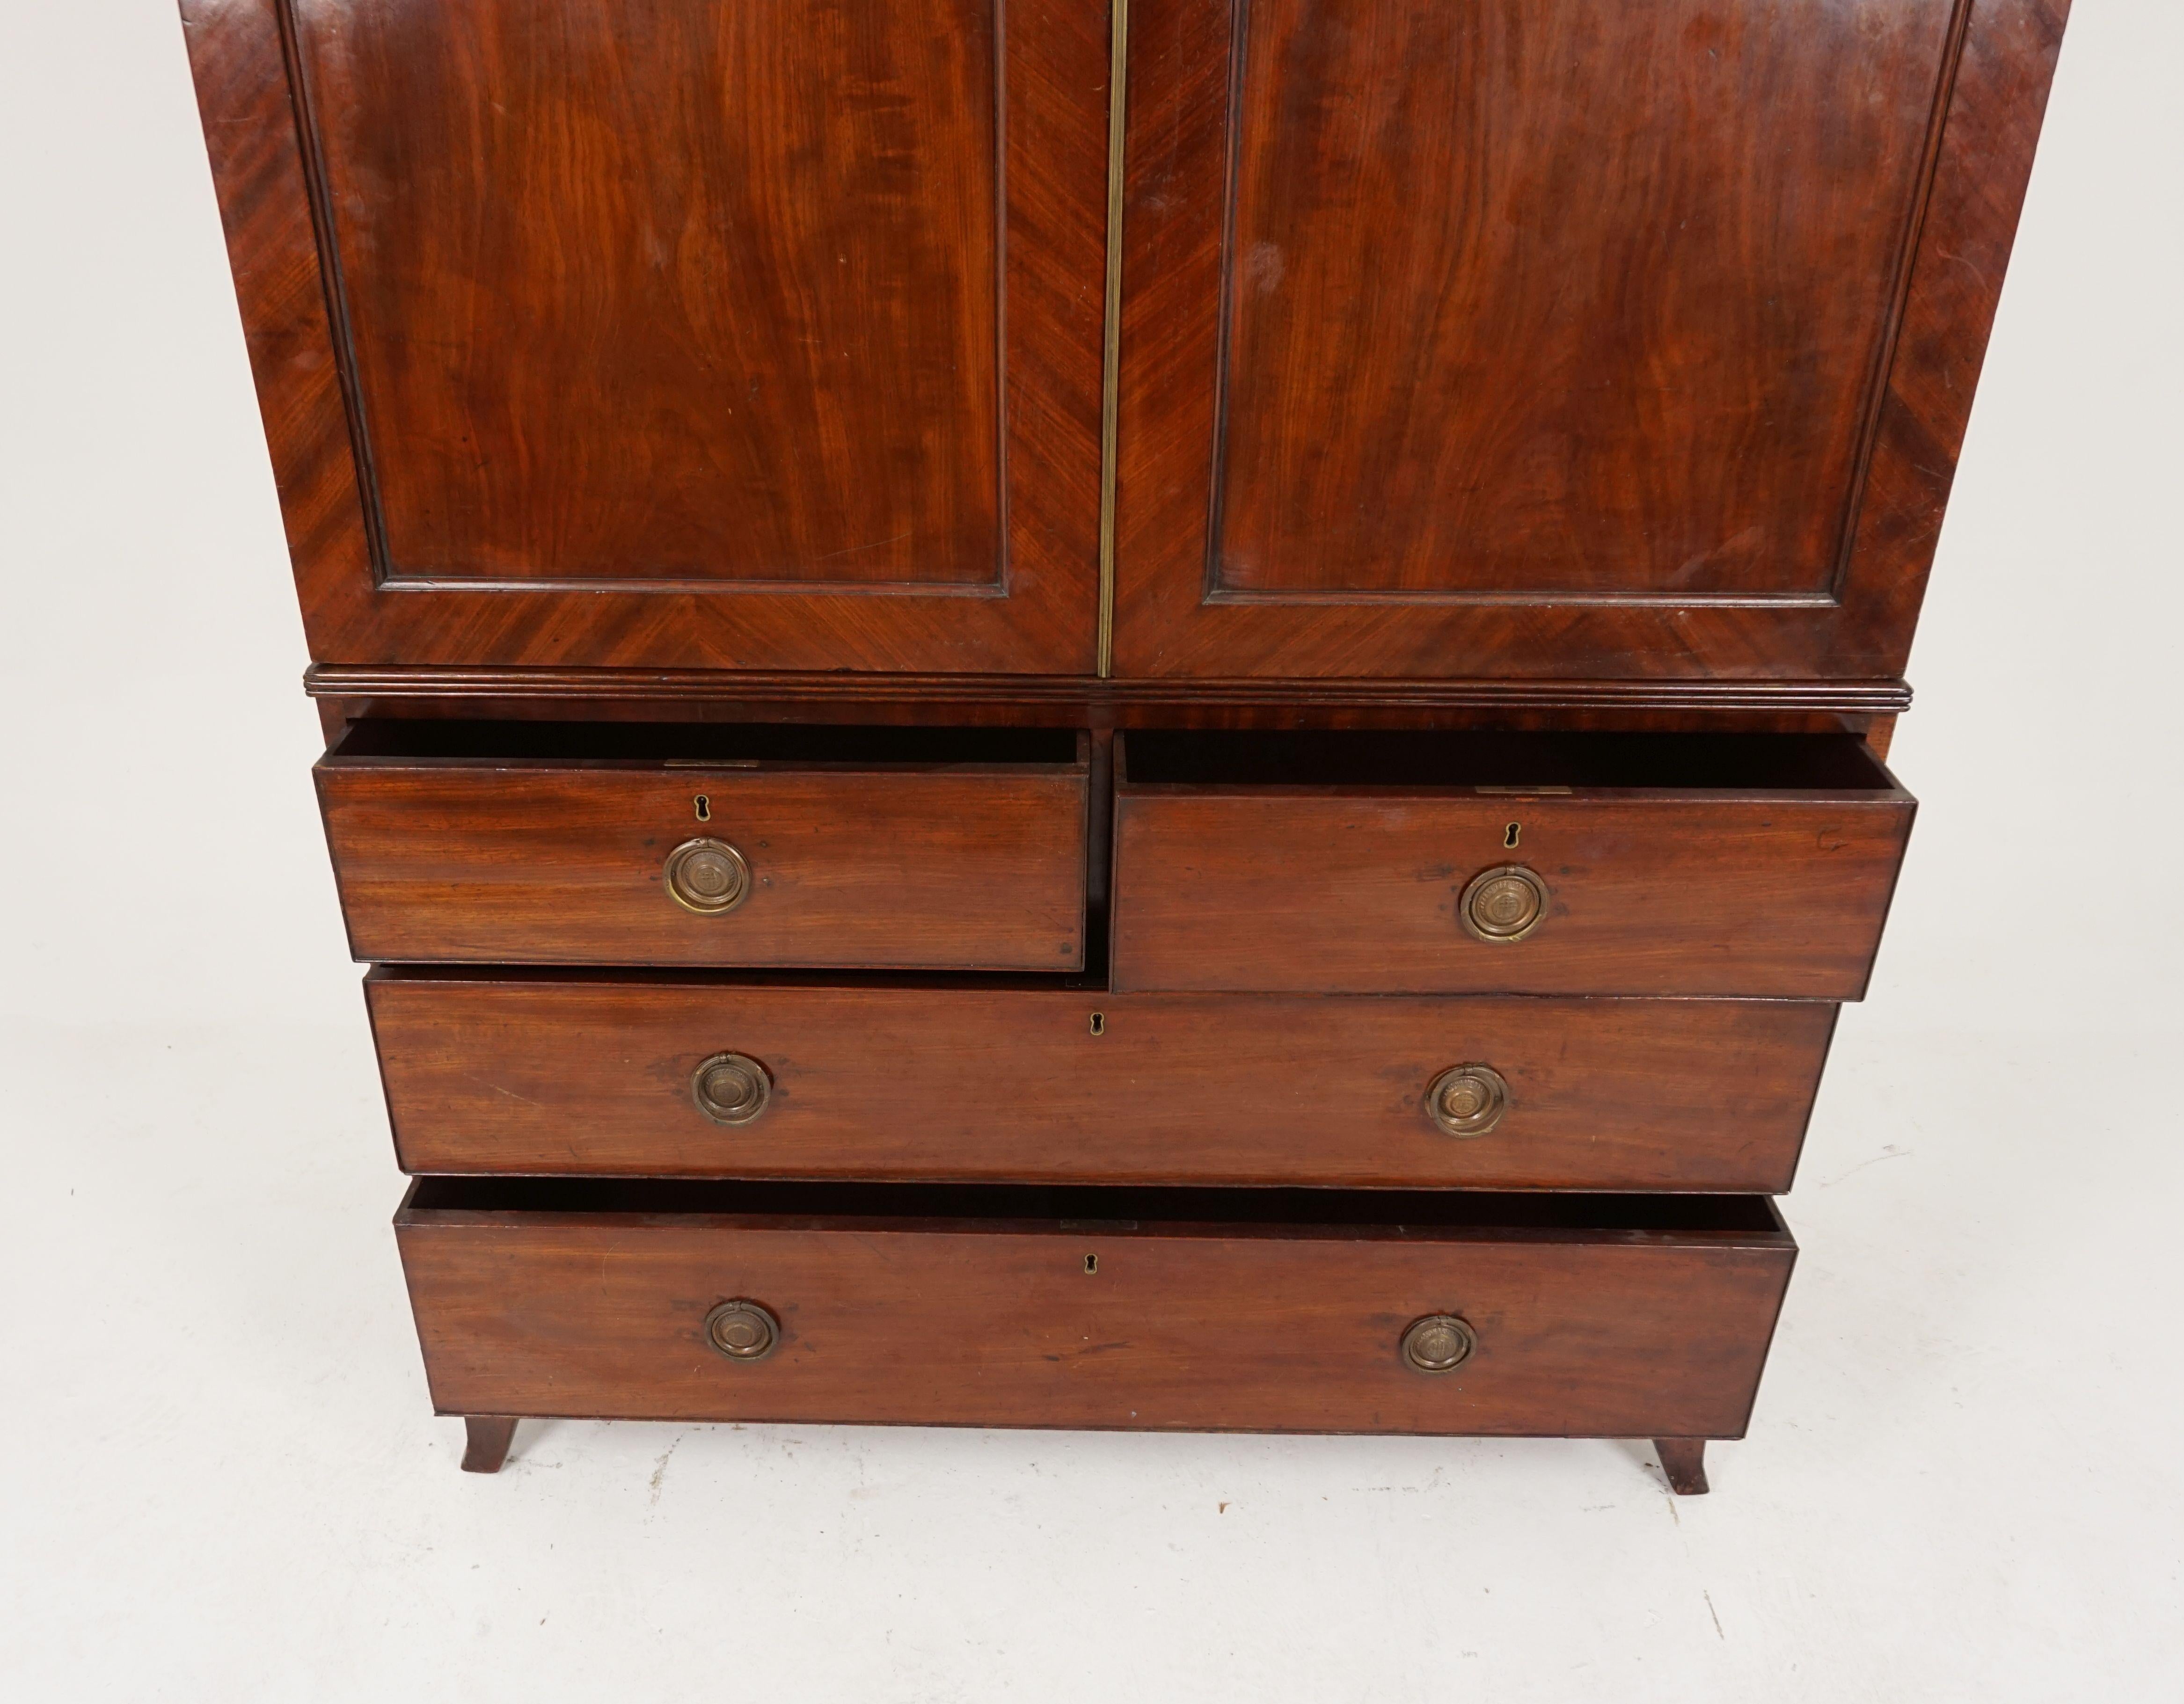 Antique Victorian walnut linen press, Armoire, Scotland, 1840, B2025

Scotland, 1840
Solid walnut
Original finish
Canopy top
Moulded cornice above
Pair of panelled doors below
Open to reveal 5 pullout drawers
Underneath are 4 dovetailed